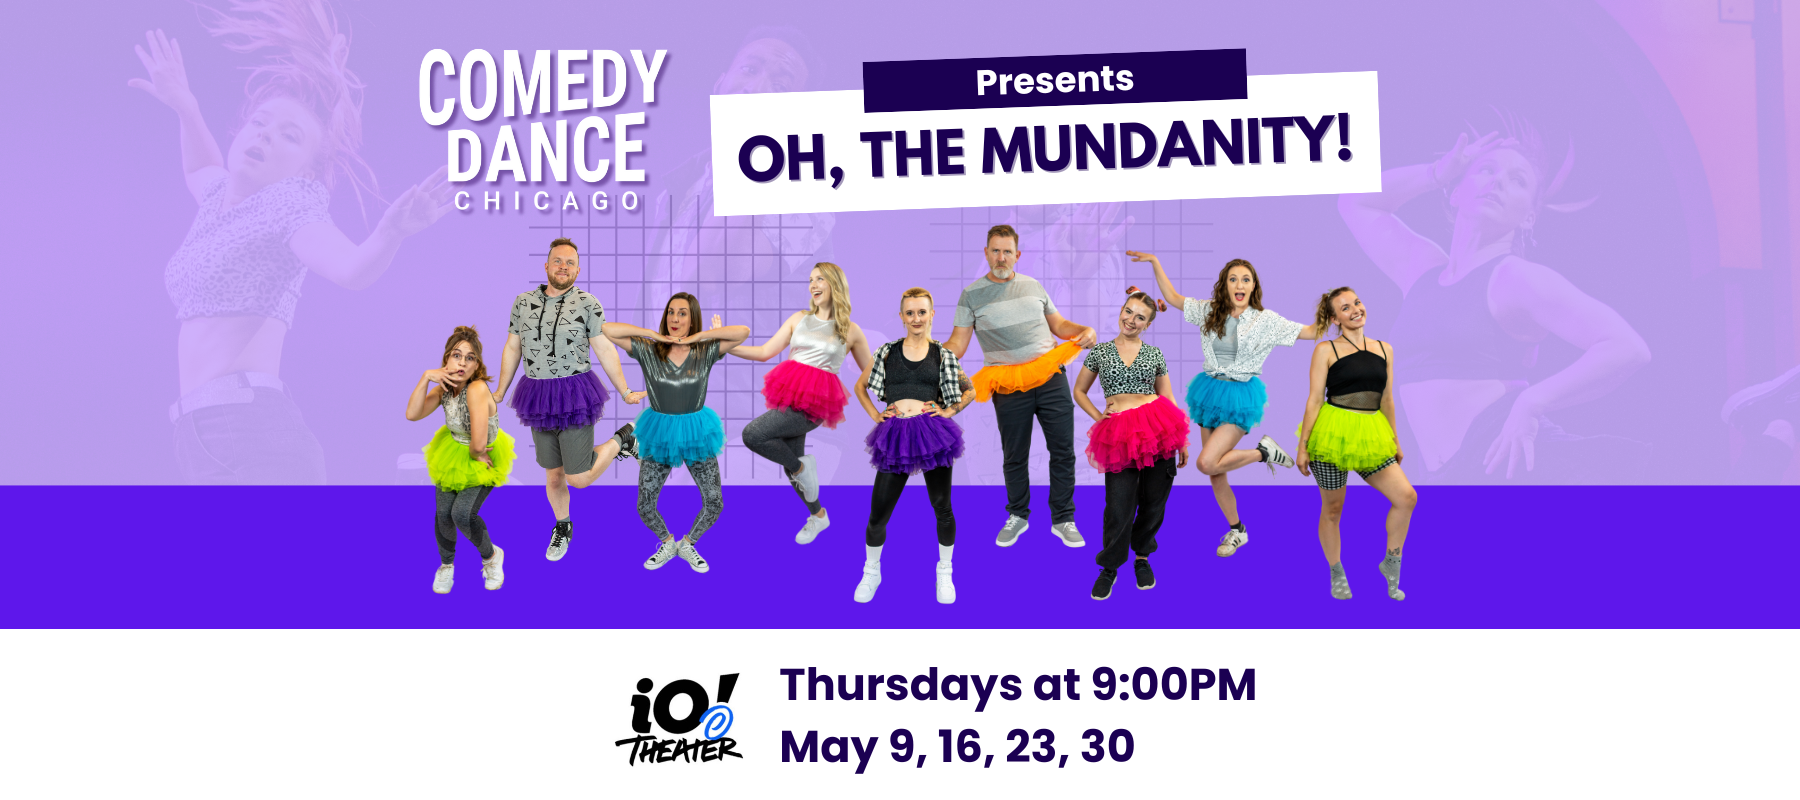 Comedy Dance Chicago presents: OH, THE MUNDANITY!